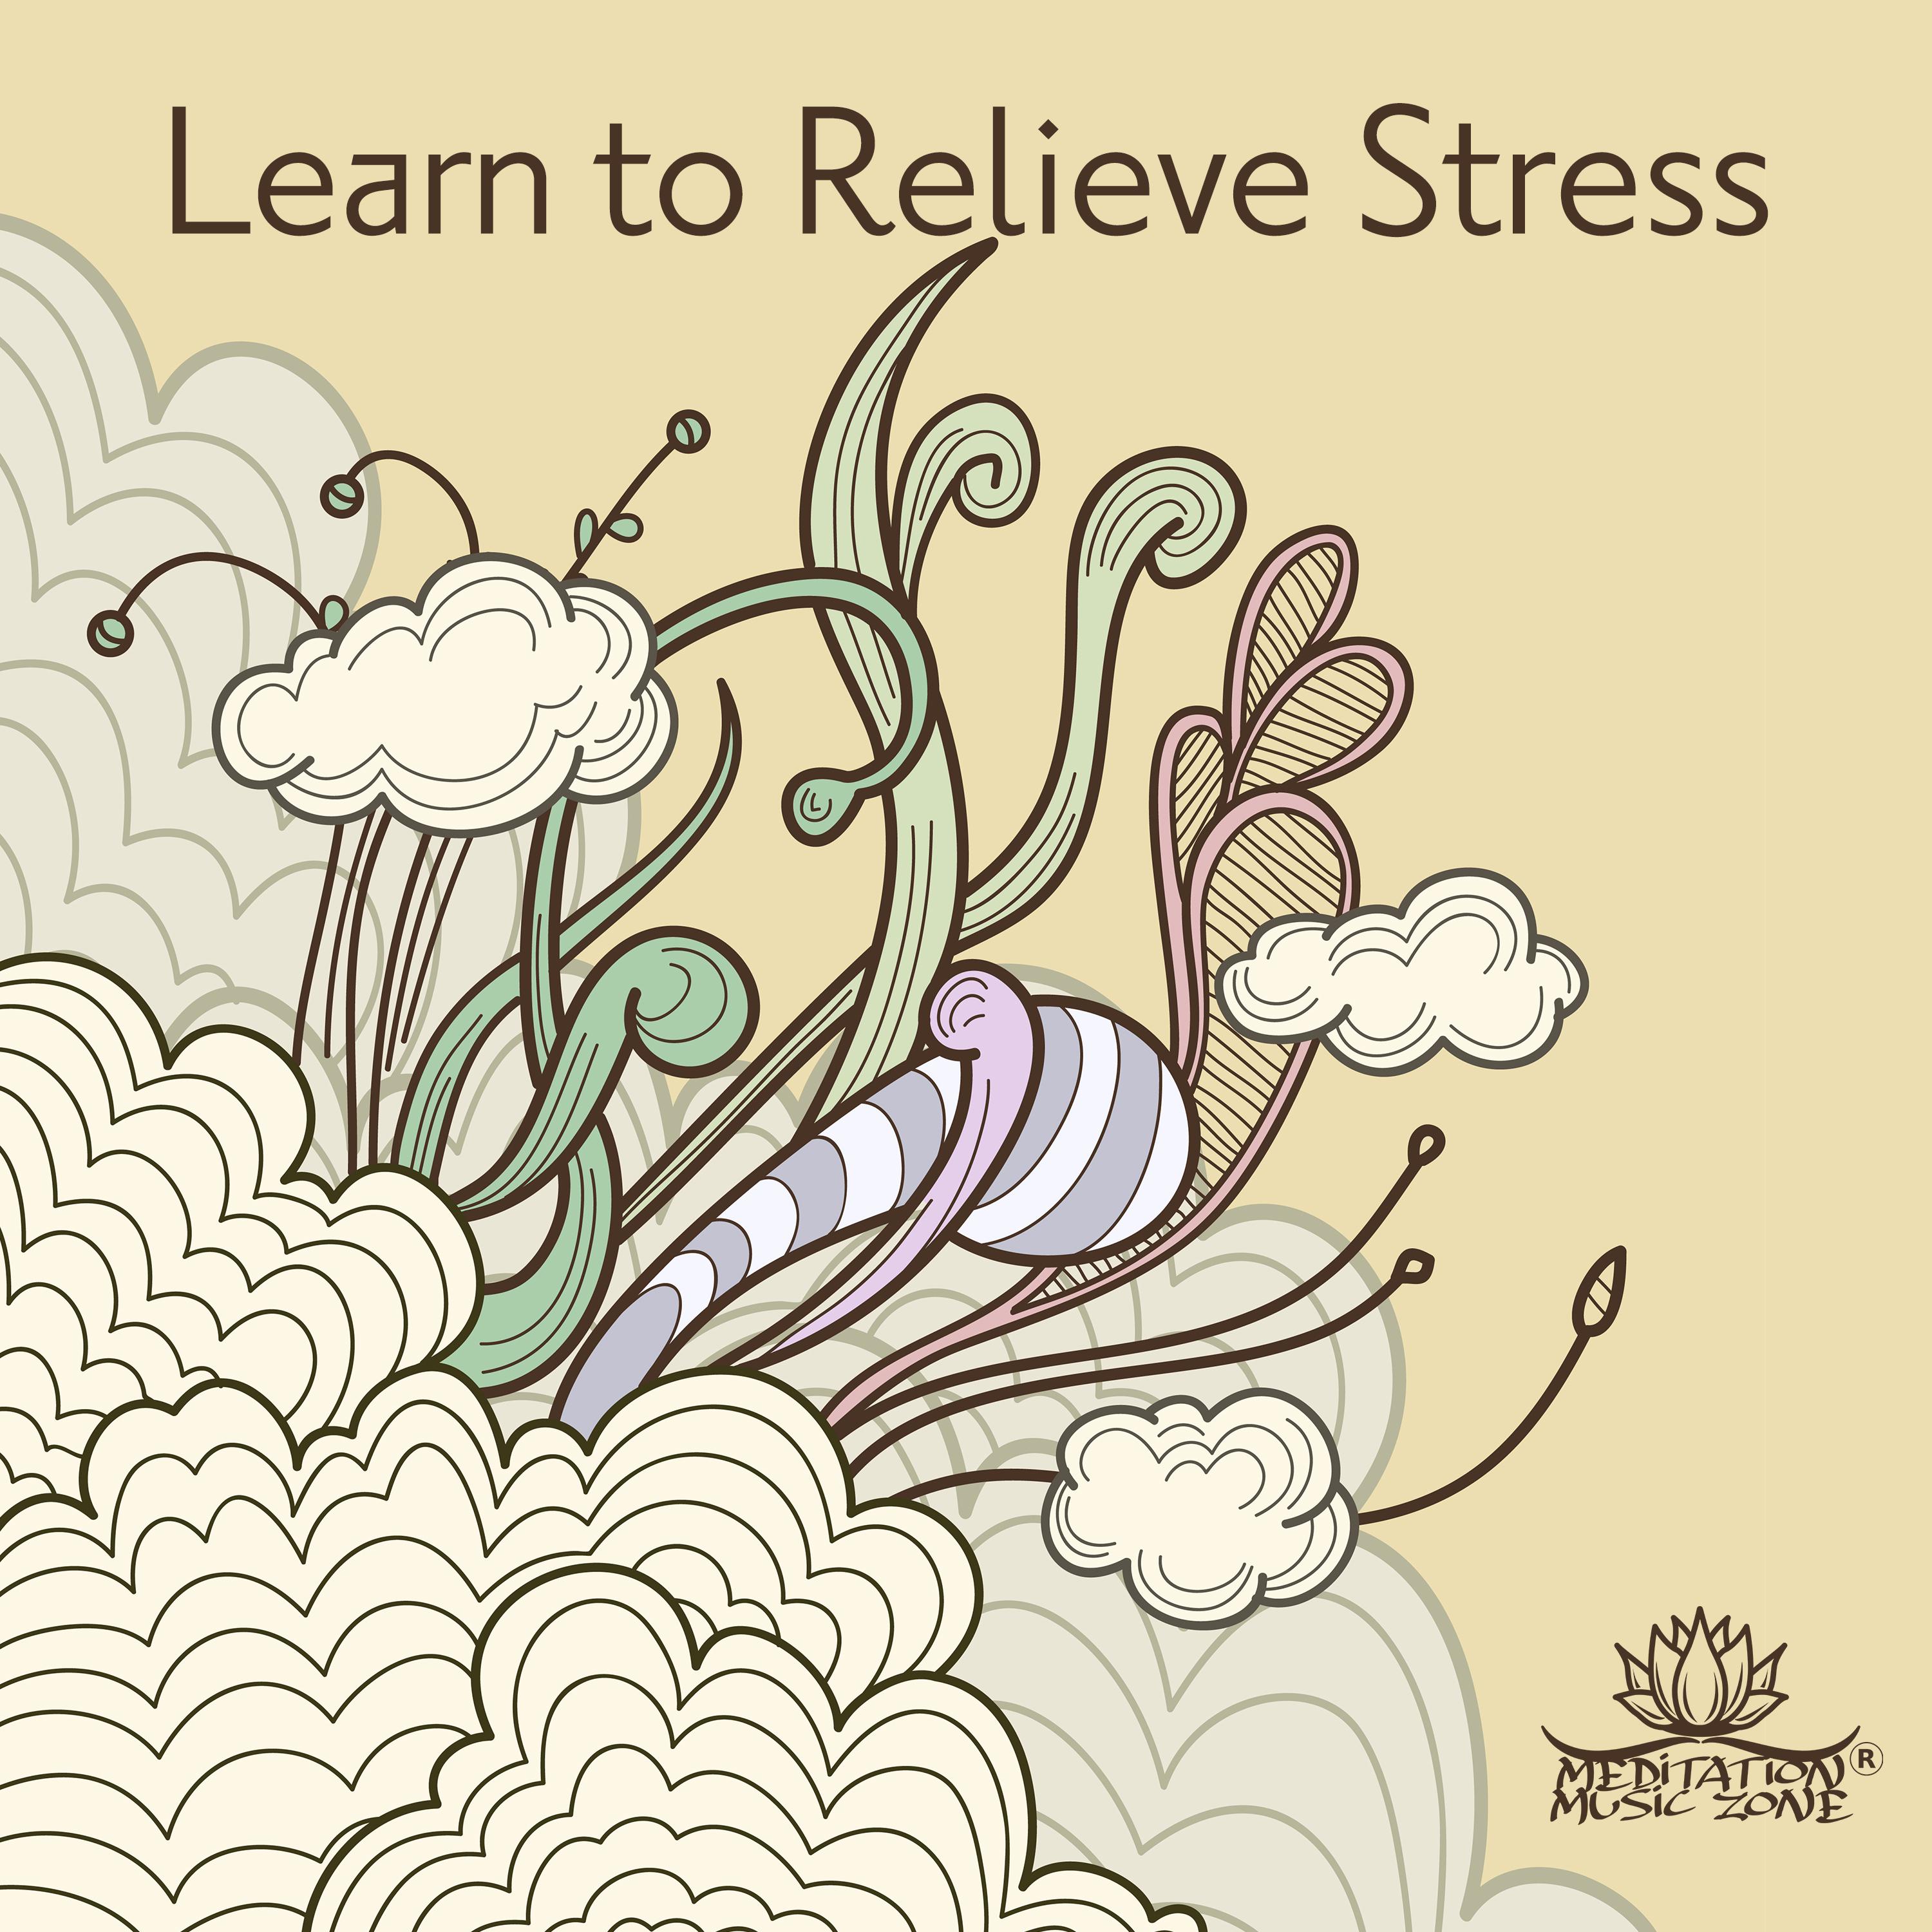 Learn to Relieve Stress